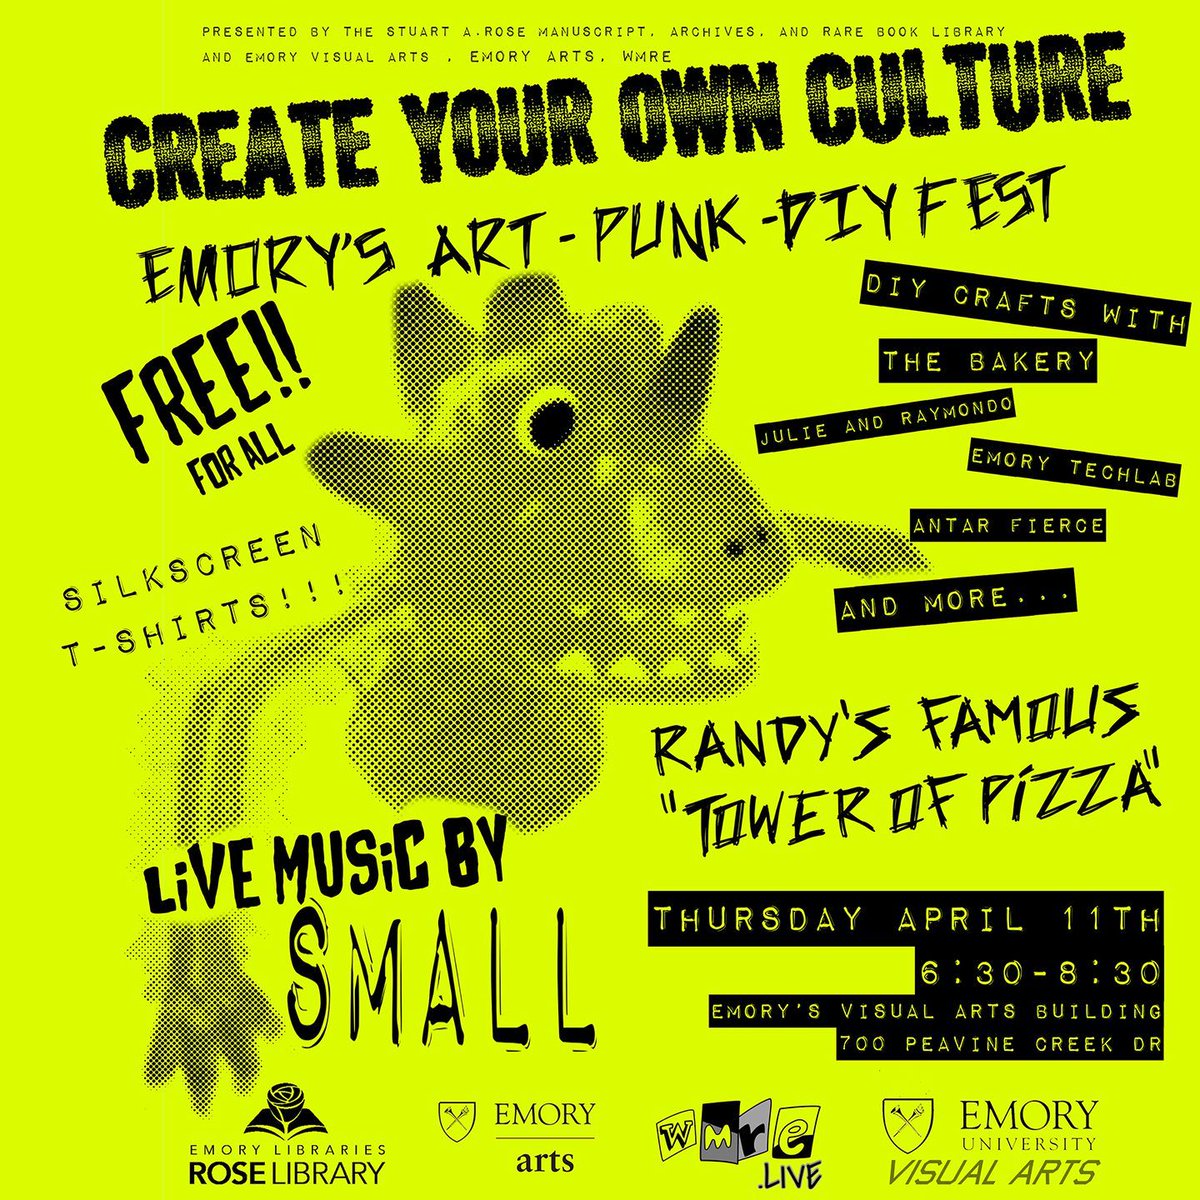 Next Thursday is our legendary Art, Punk, and DIY Fest! It's a night of live music and hands-on activities in celebration of Rose's Atlanta punk collection! This year’s event features a live set by seething Atlanta punk legends Small. Join us at Emory Visual Arts from 6:30-8:30!